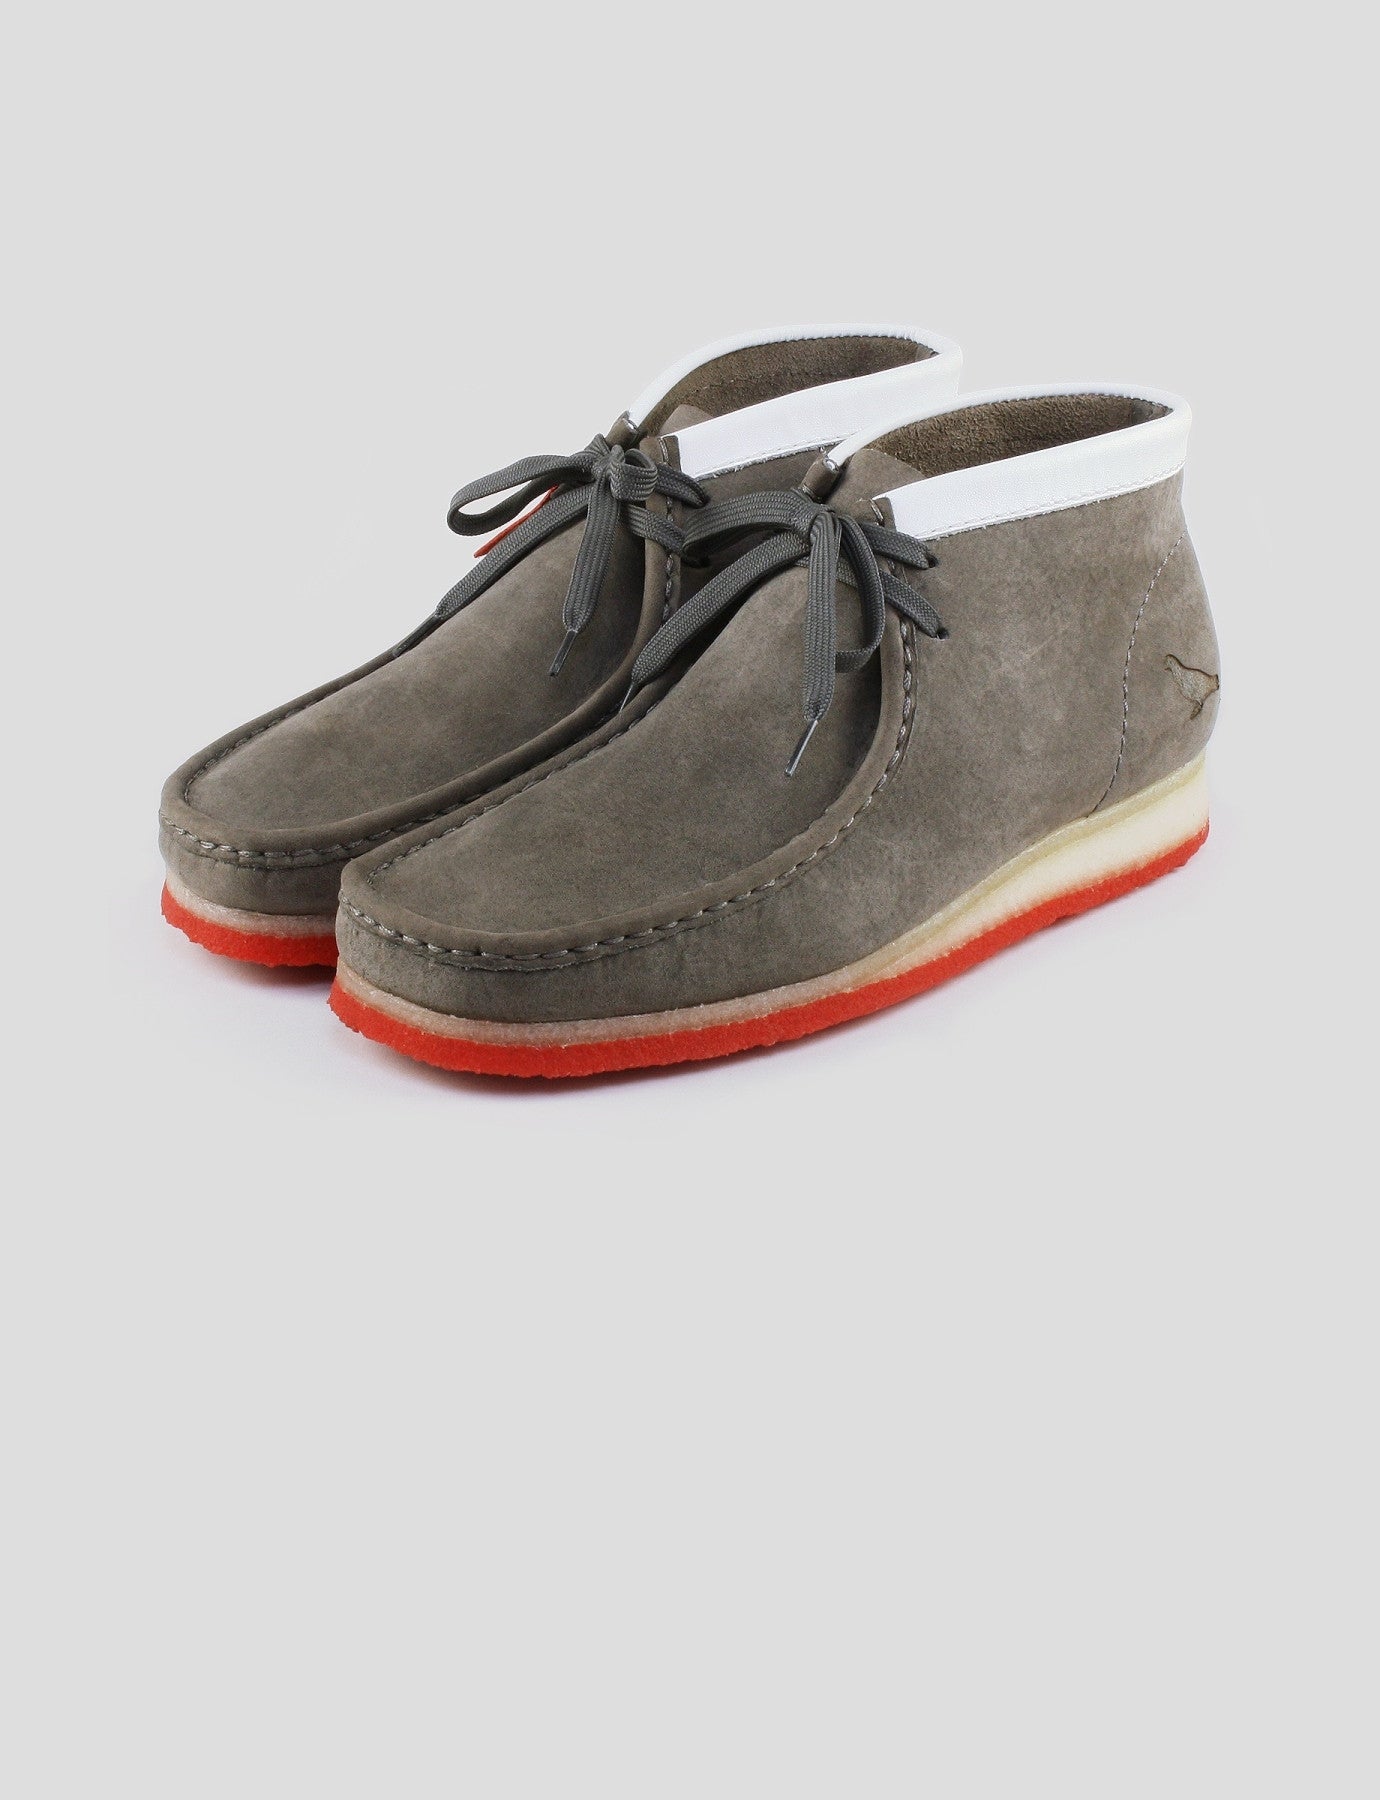 clarks wallabee moccasin